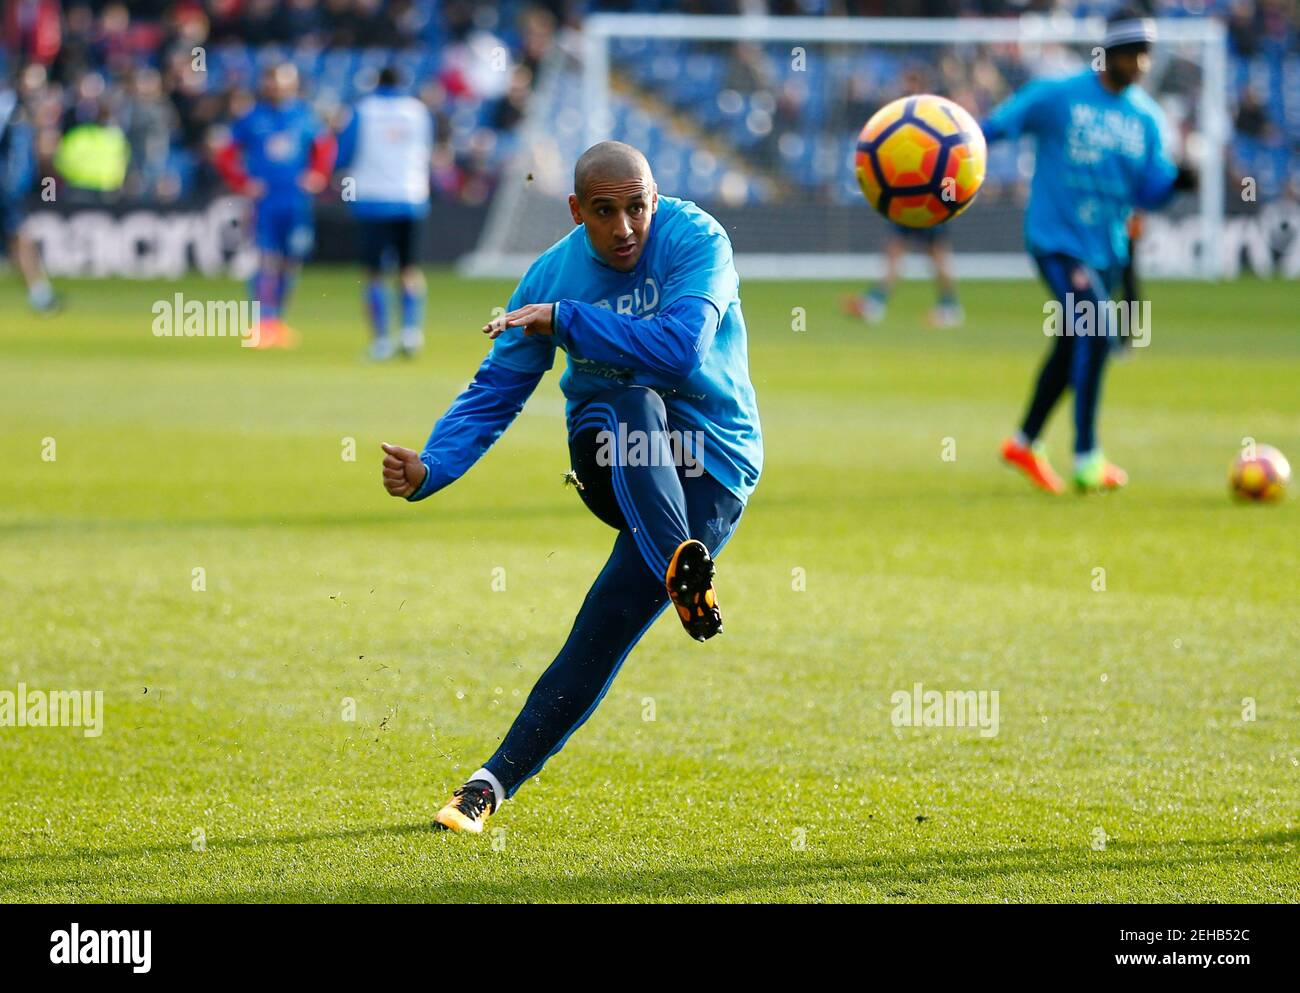 Britain Football Soccer - Crystal Palace v Sunderland - Premier League - Selhurst Park - 4/2/17 Sunderland's Wahbi Khazri warms up before the match  Reuters / Andrew Winning Livepic EDITORIAL USE ONLY. No use with unauthorized audio, video, data, fixture lists, club/league logos or 'live' services. Online in-match use limited to 45 images, no video emulation. No use in betting, games or single club/league/player publications.  Please contact your account representative for further details. Stock Photo